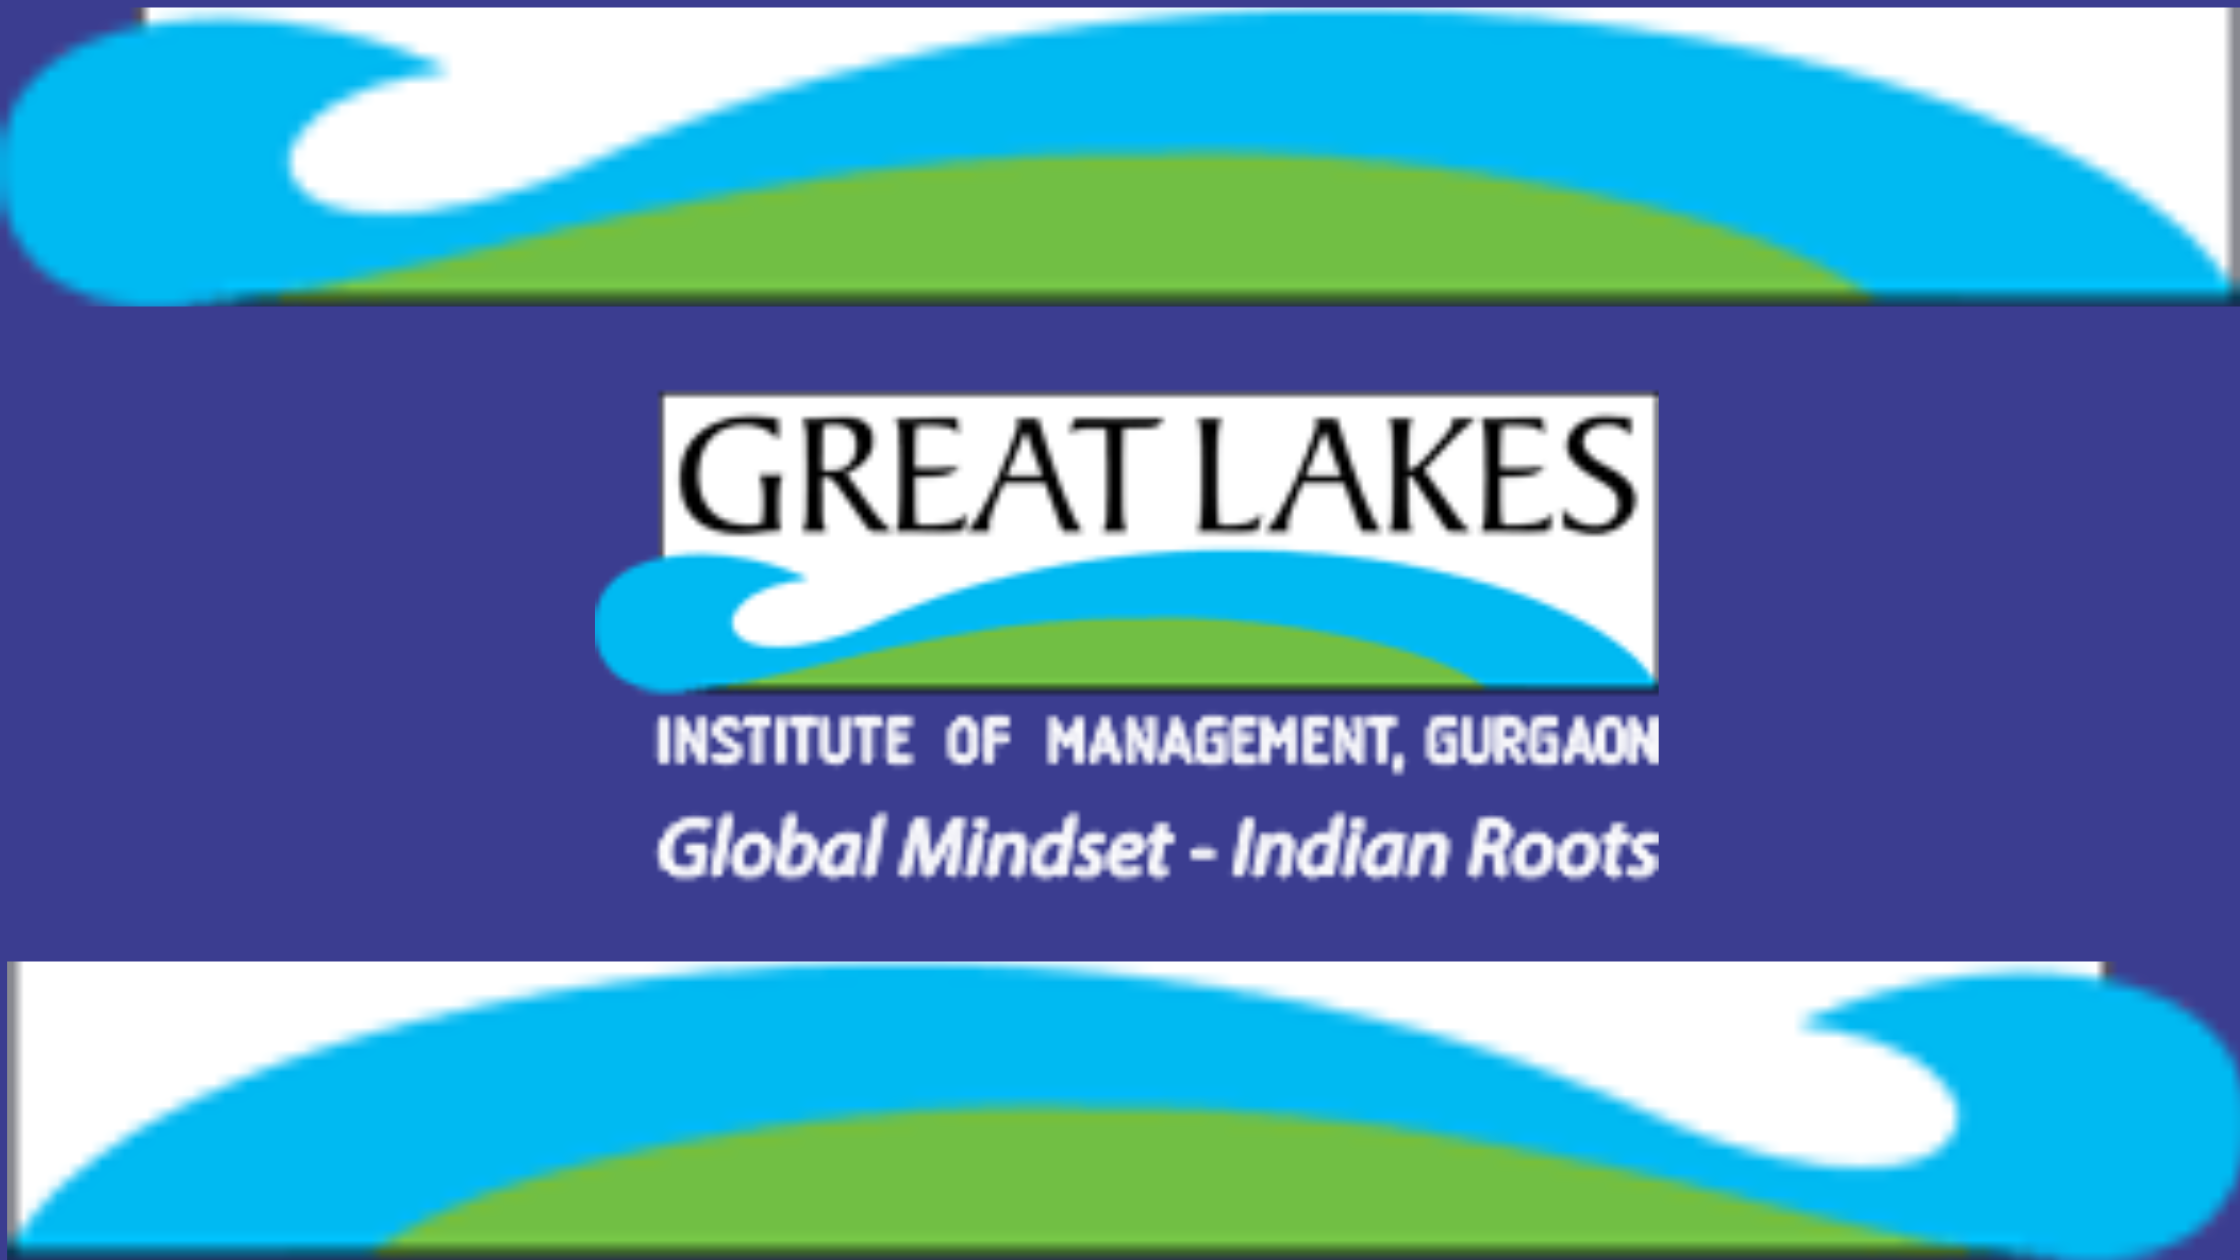 You are currently viewing Great lakes Gurgaon: Highlights, Fees & Course, Eligibility, Important Dates